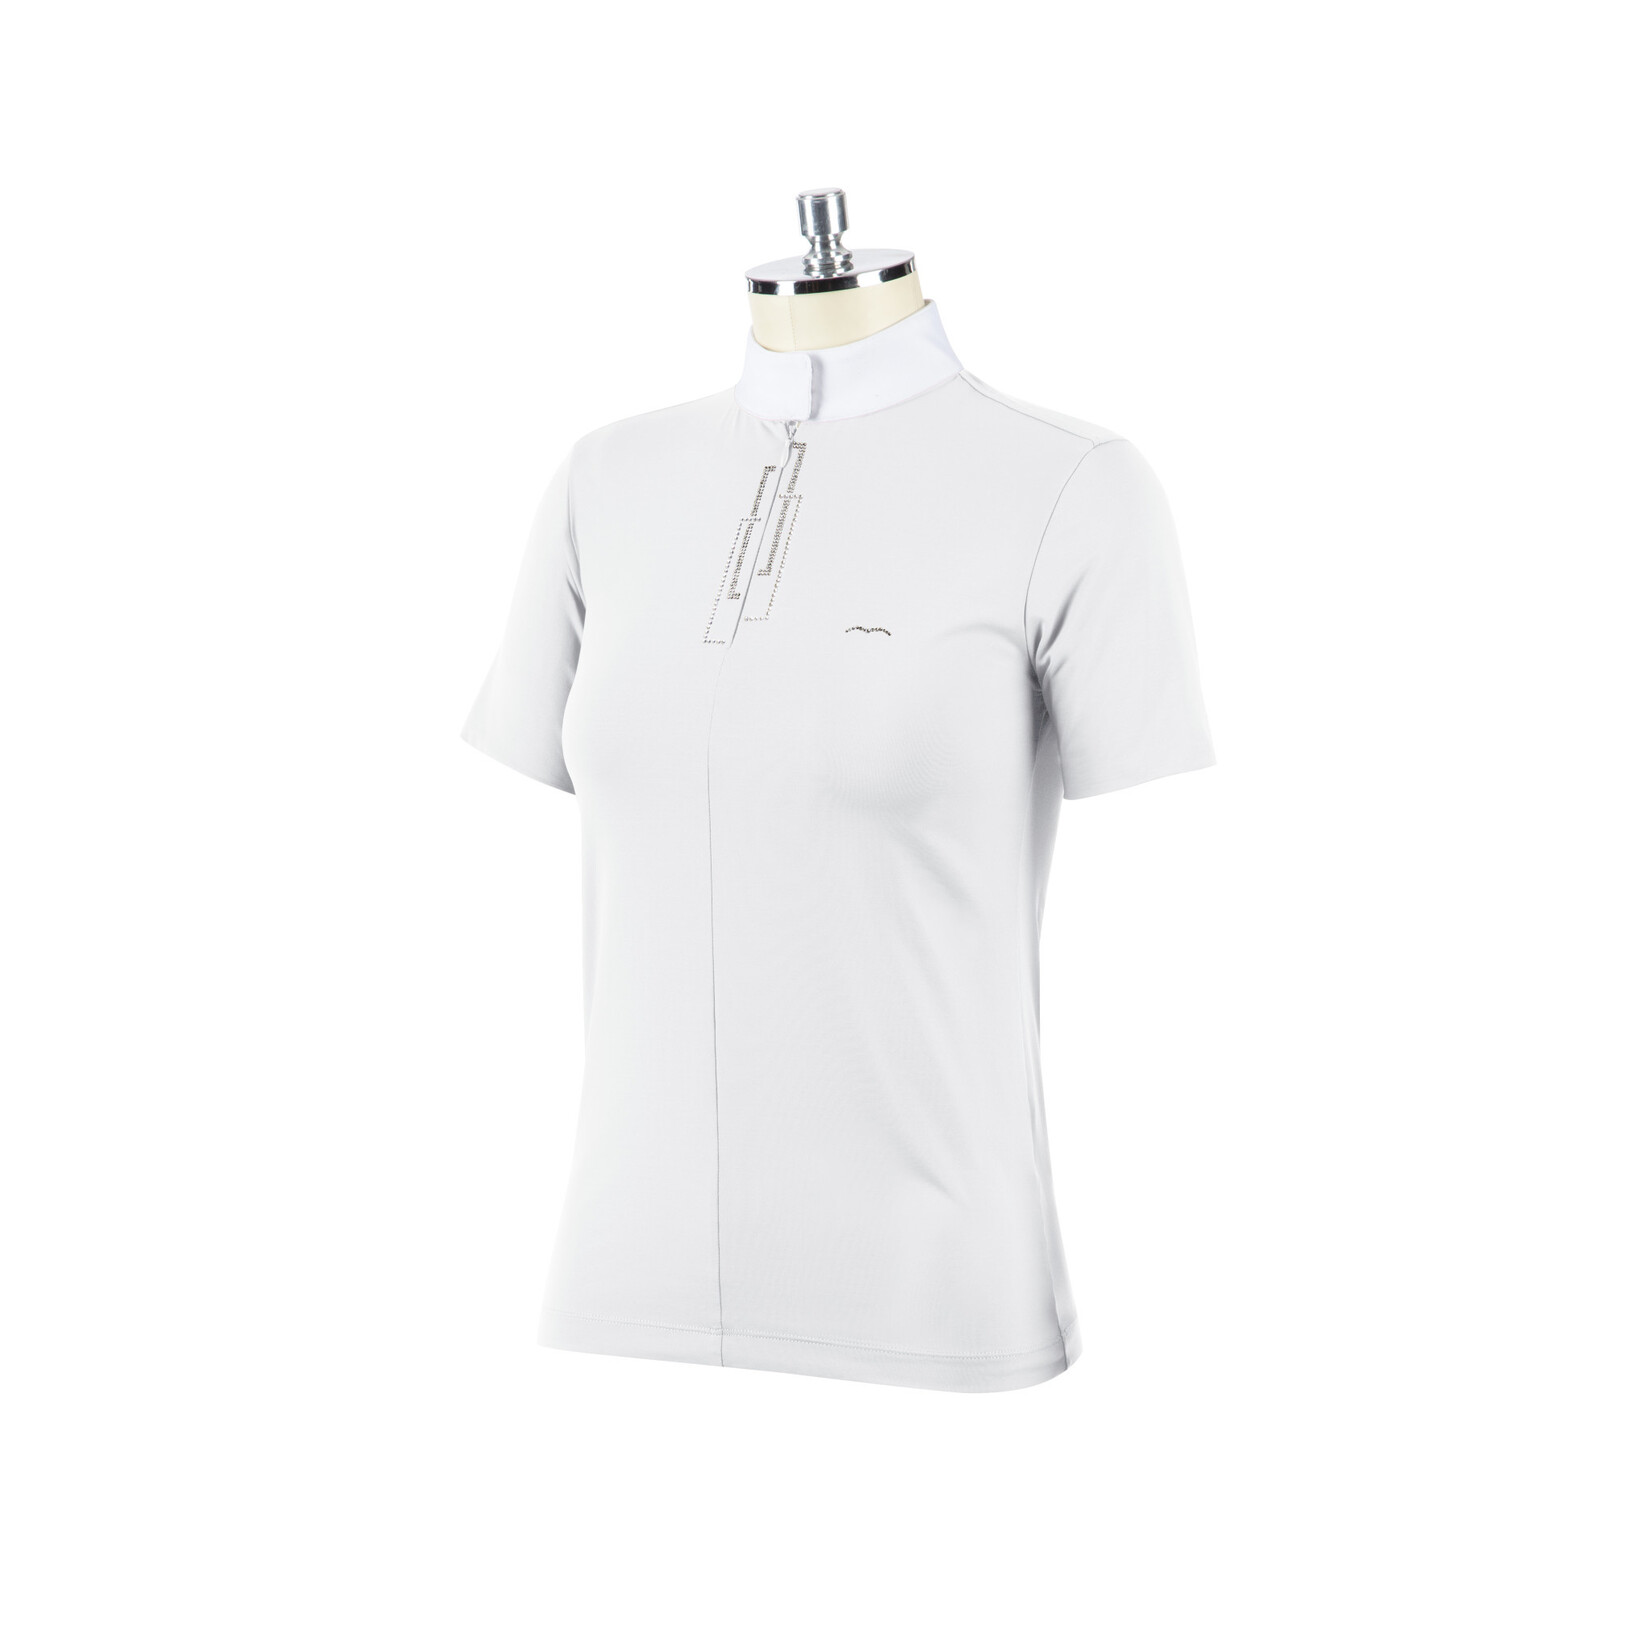 Animo Buby Women's jersey short sleeve competition "jewel" polo